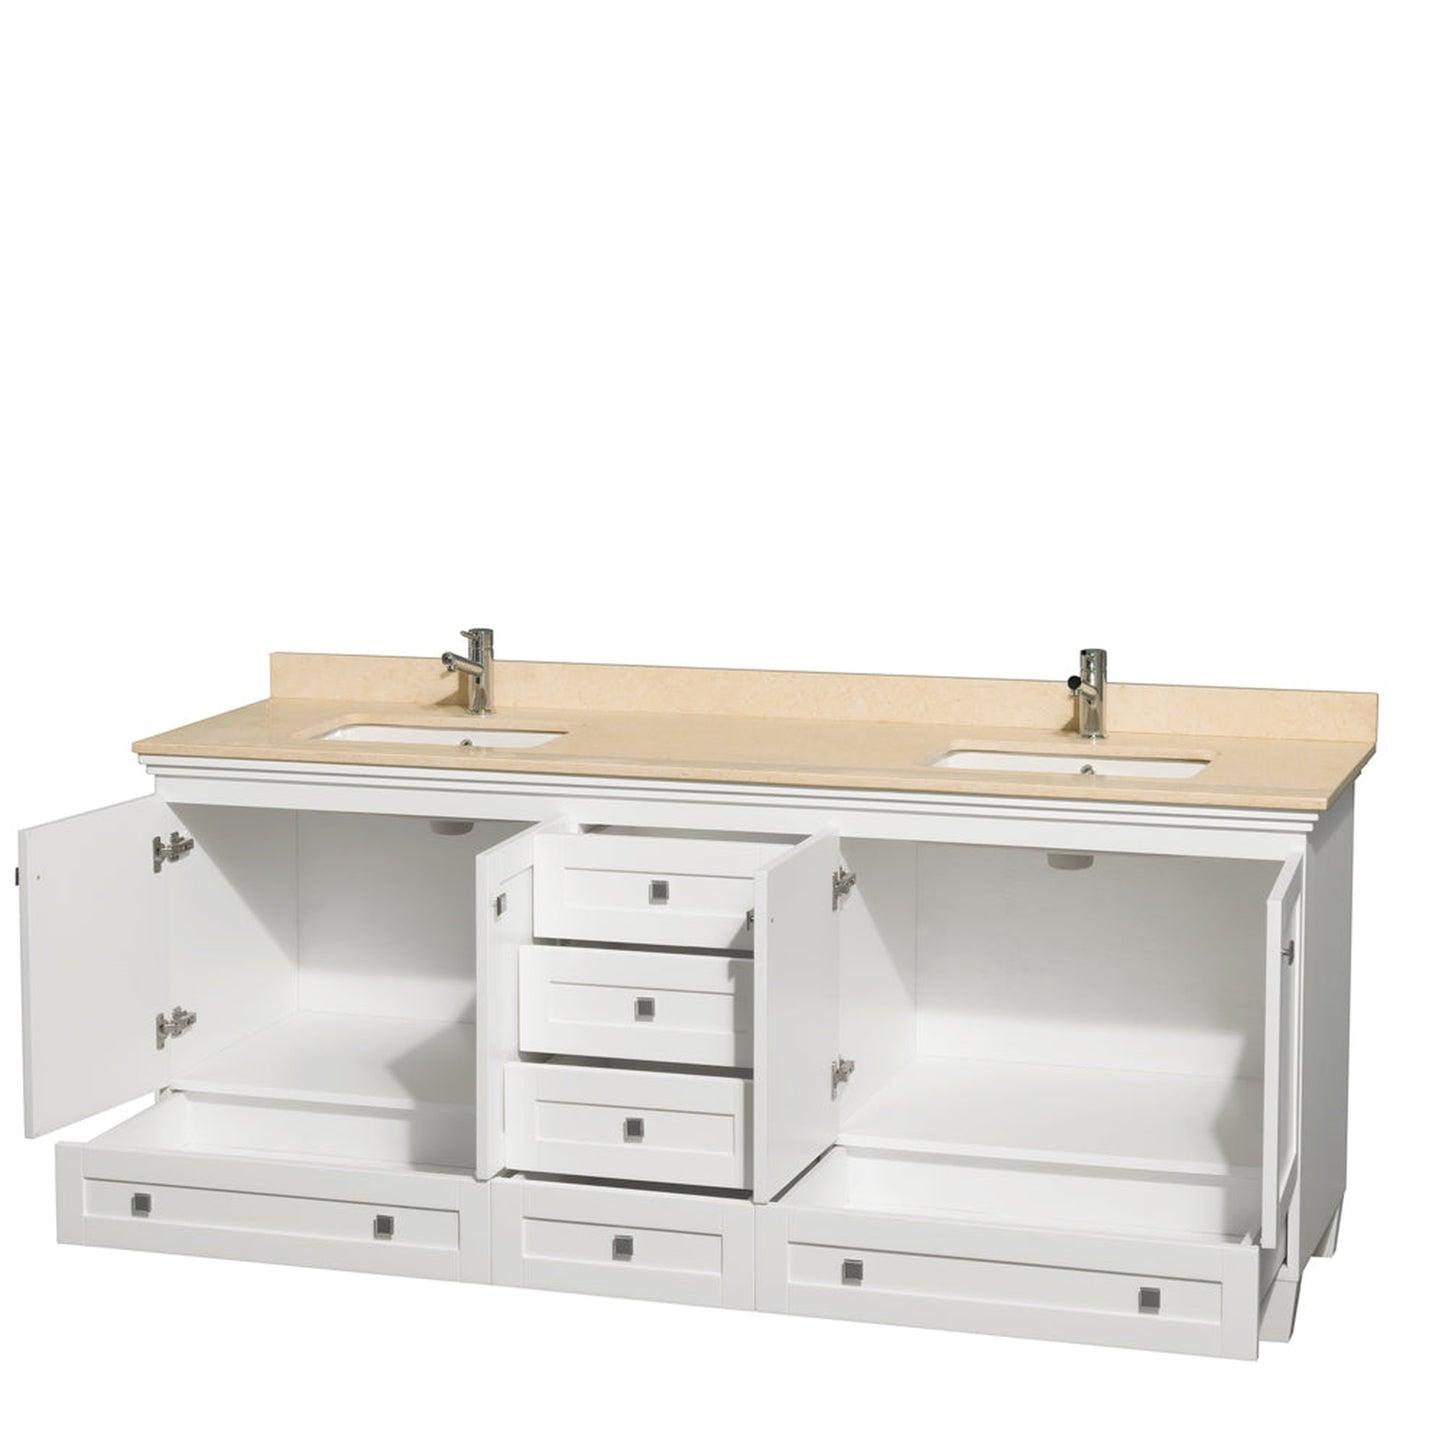 Wyndham Collection Acclaim 80" Double Bathroom Vanity in White With Ivory Marble Countertop & Undermount Square Sink